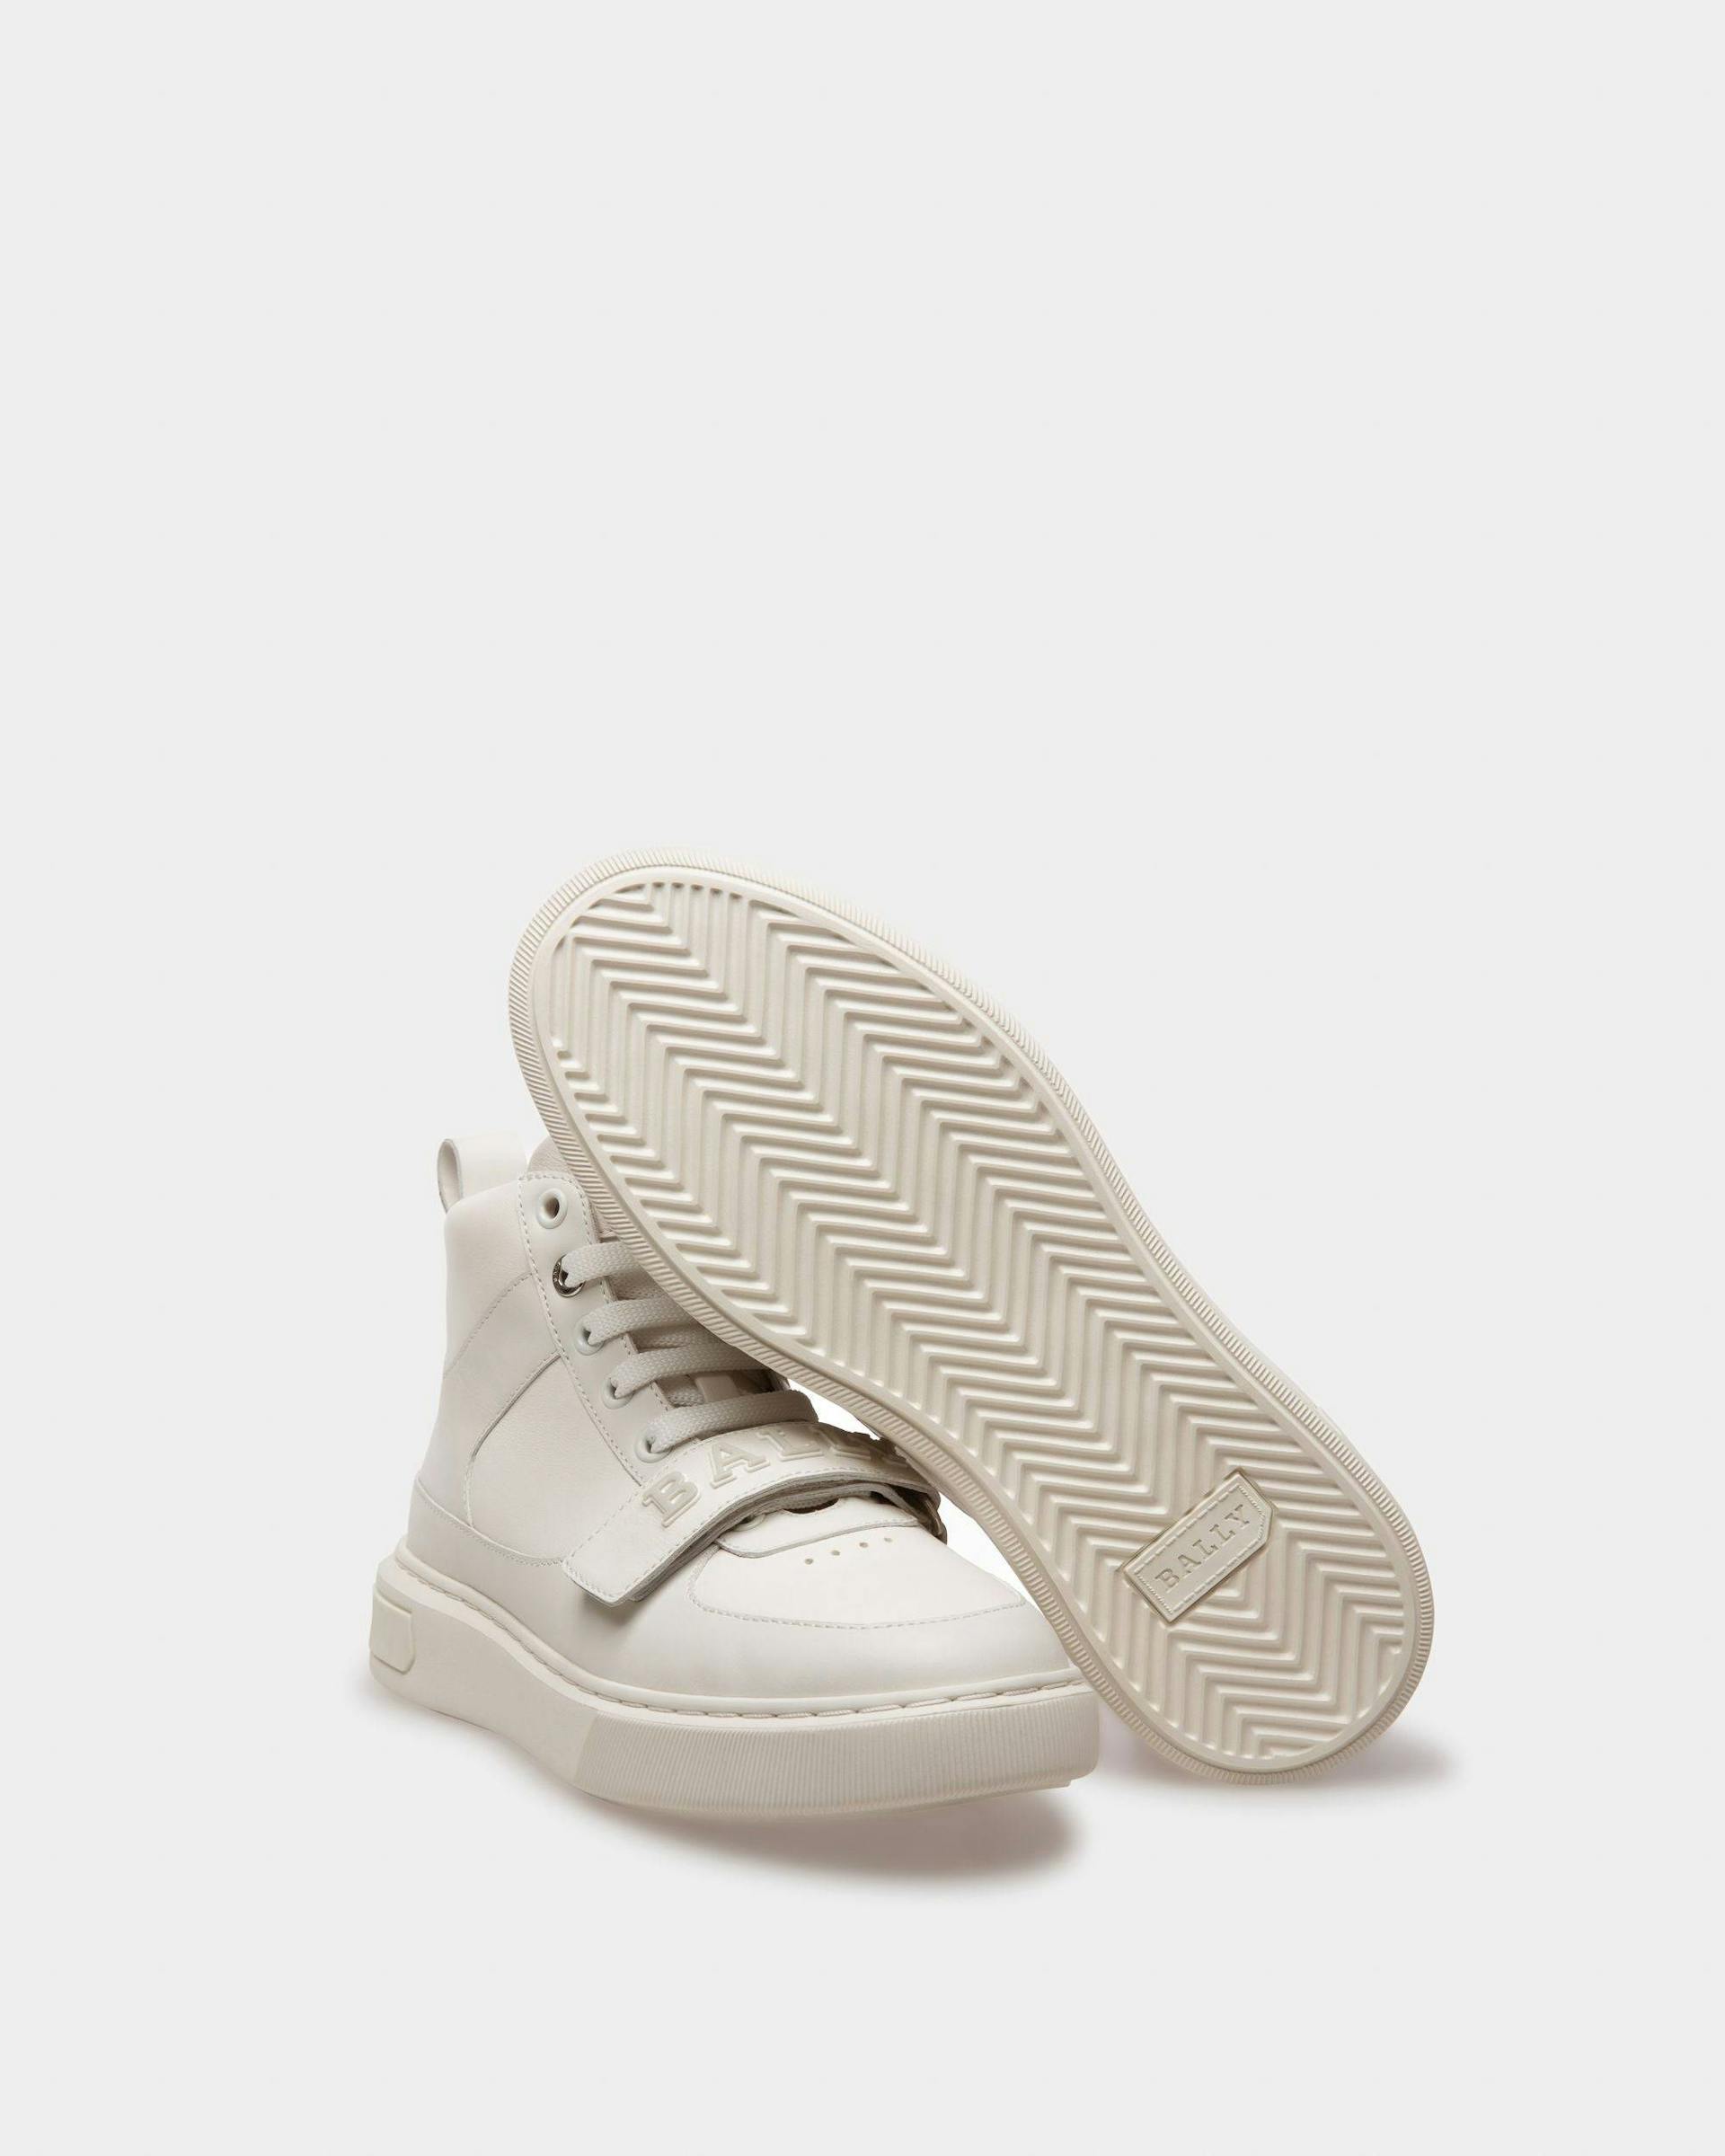 Merryk Leather Sneakers In White - Women's - Bally - 05